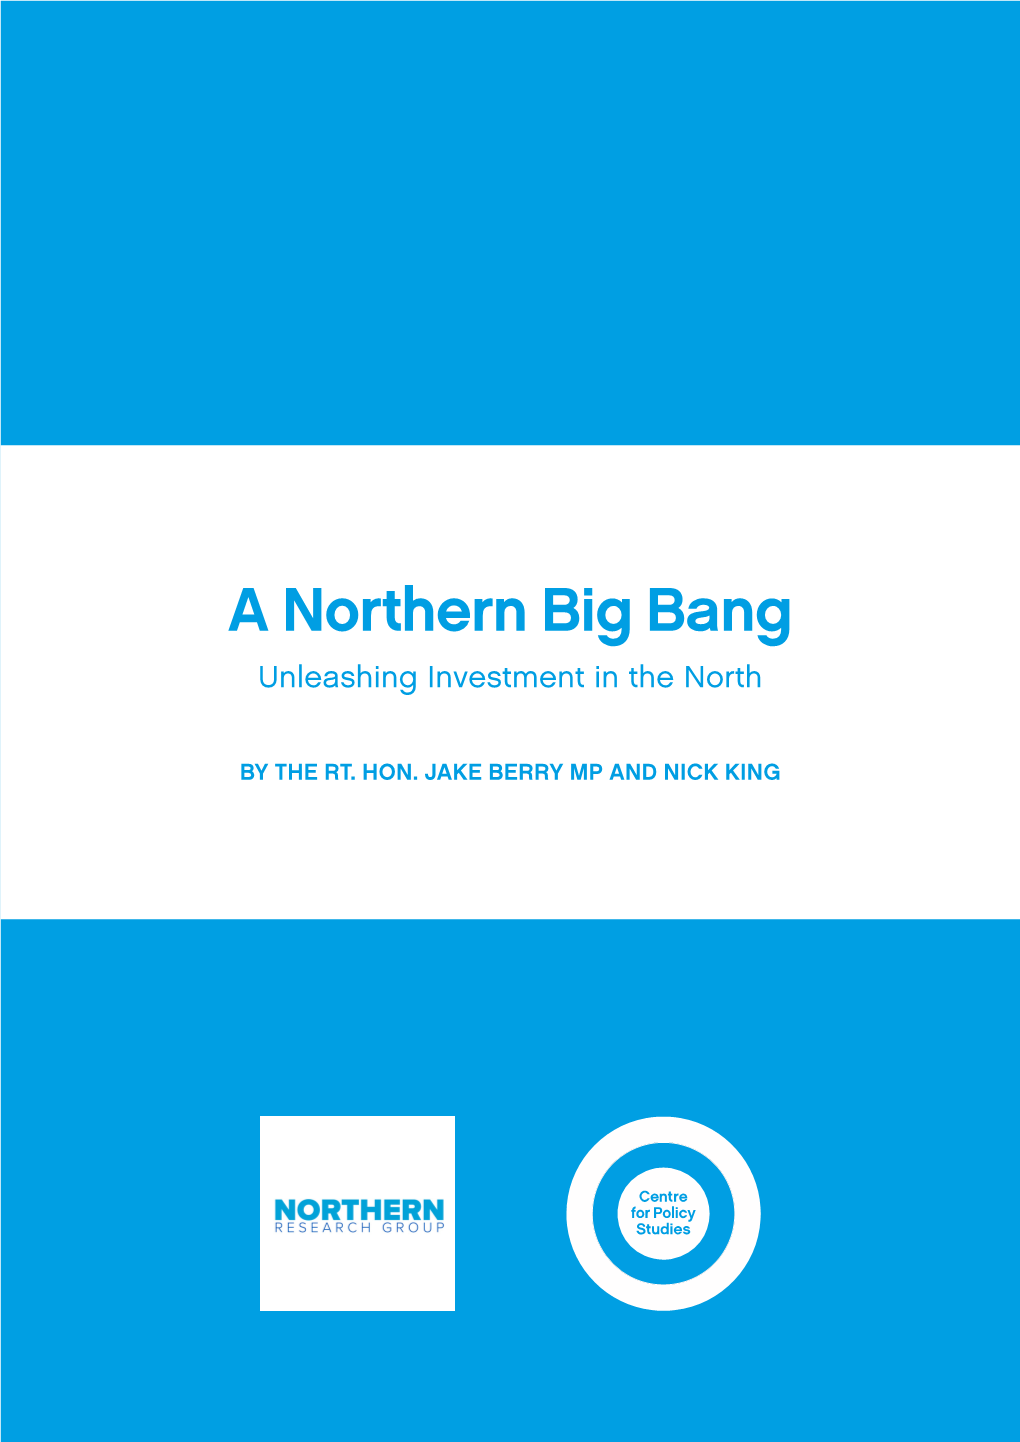 A Northern Big Bang: Unleashing Investment in the North